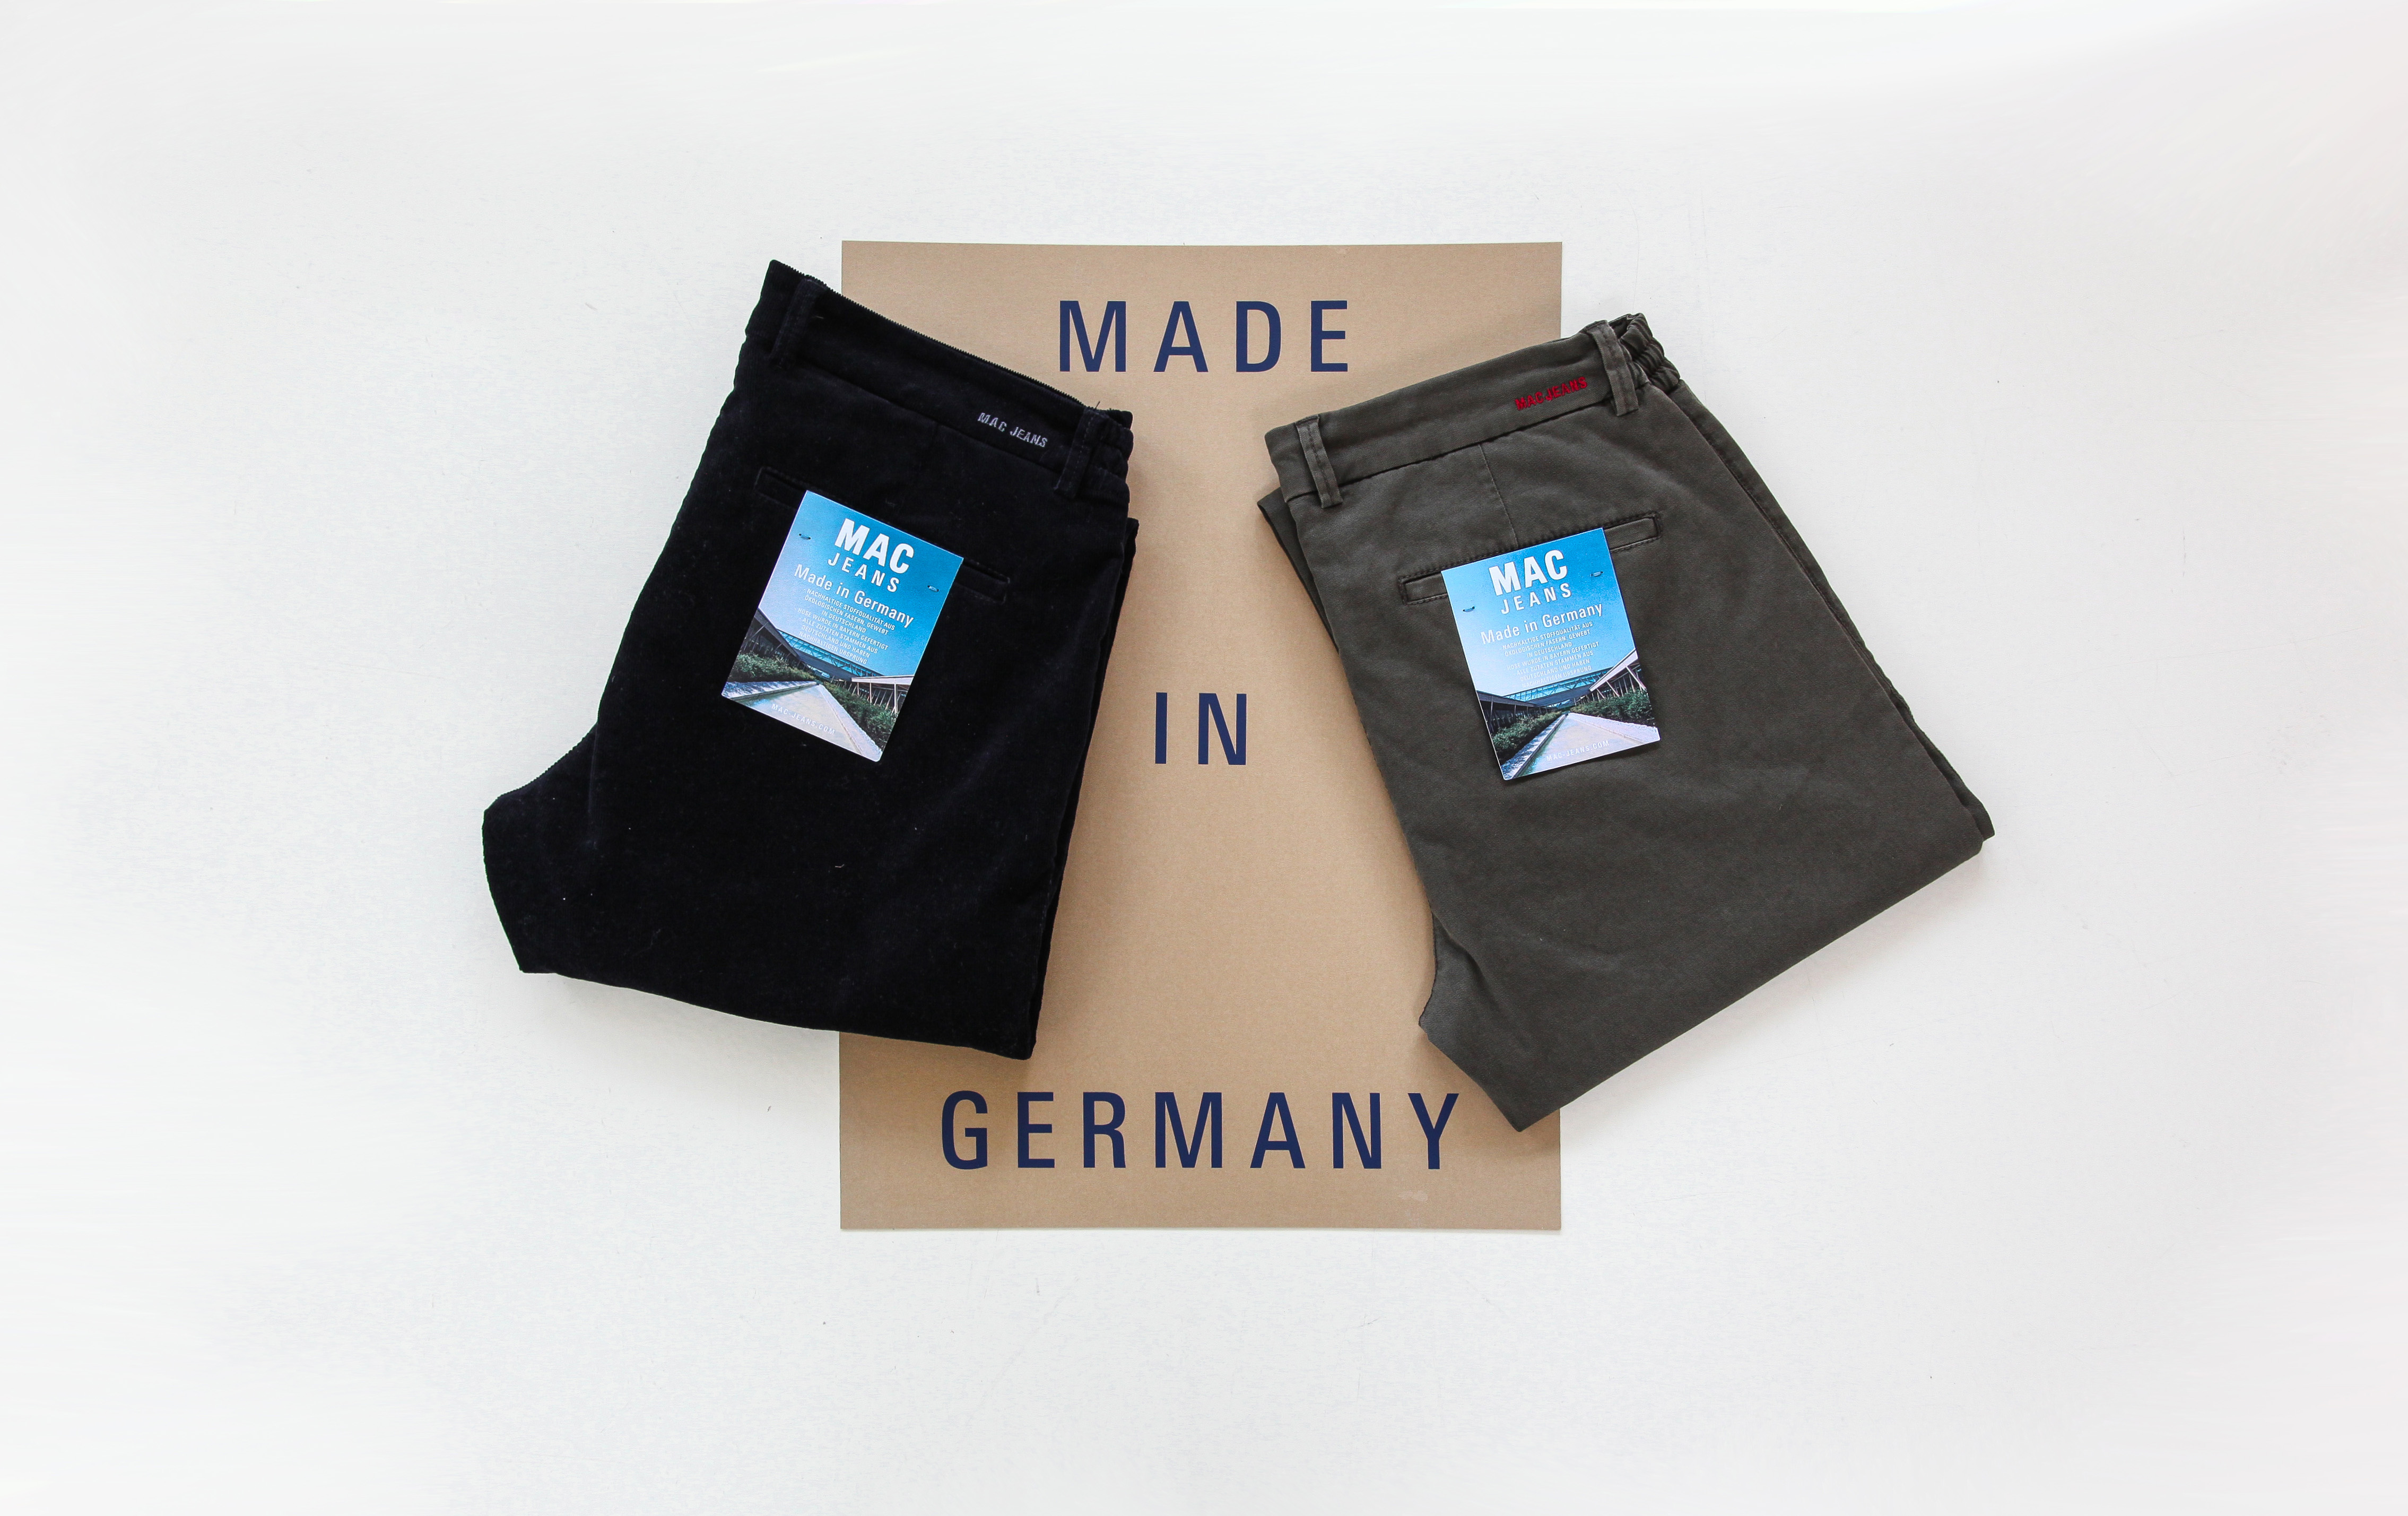 Preview image for Fortsetzung der „Made in Germany“-Serie: neue Menswear-Styles in feiner Cord-Optik